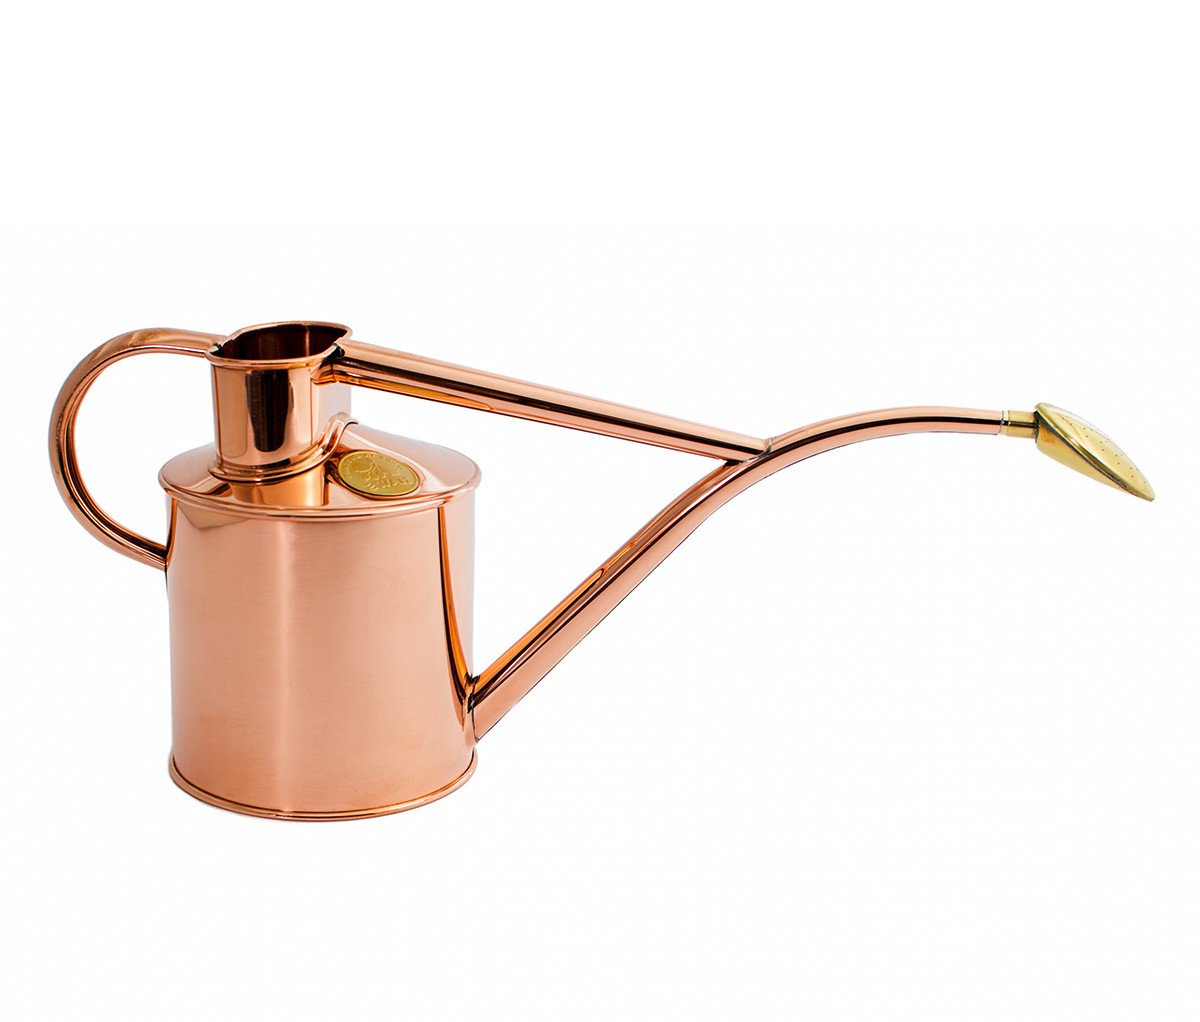 The Rowley Ripple Two Pint Watering Can Haws Zimmer Gießkanne 1 Liter (Copper-Kupfer)